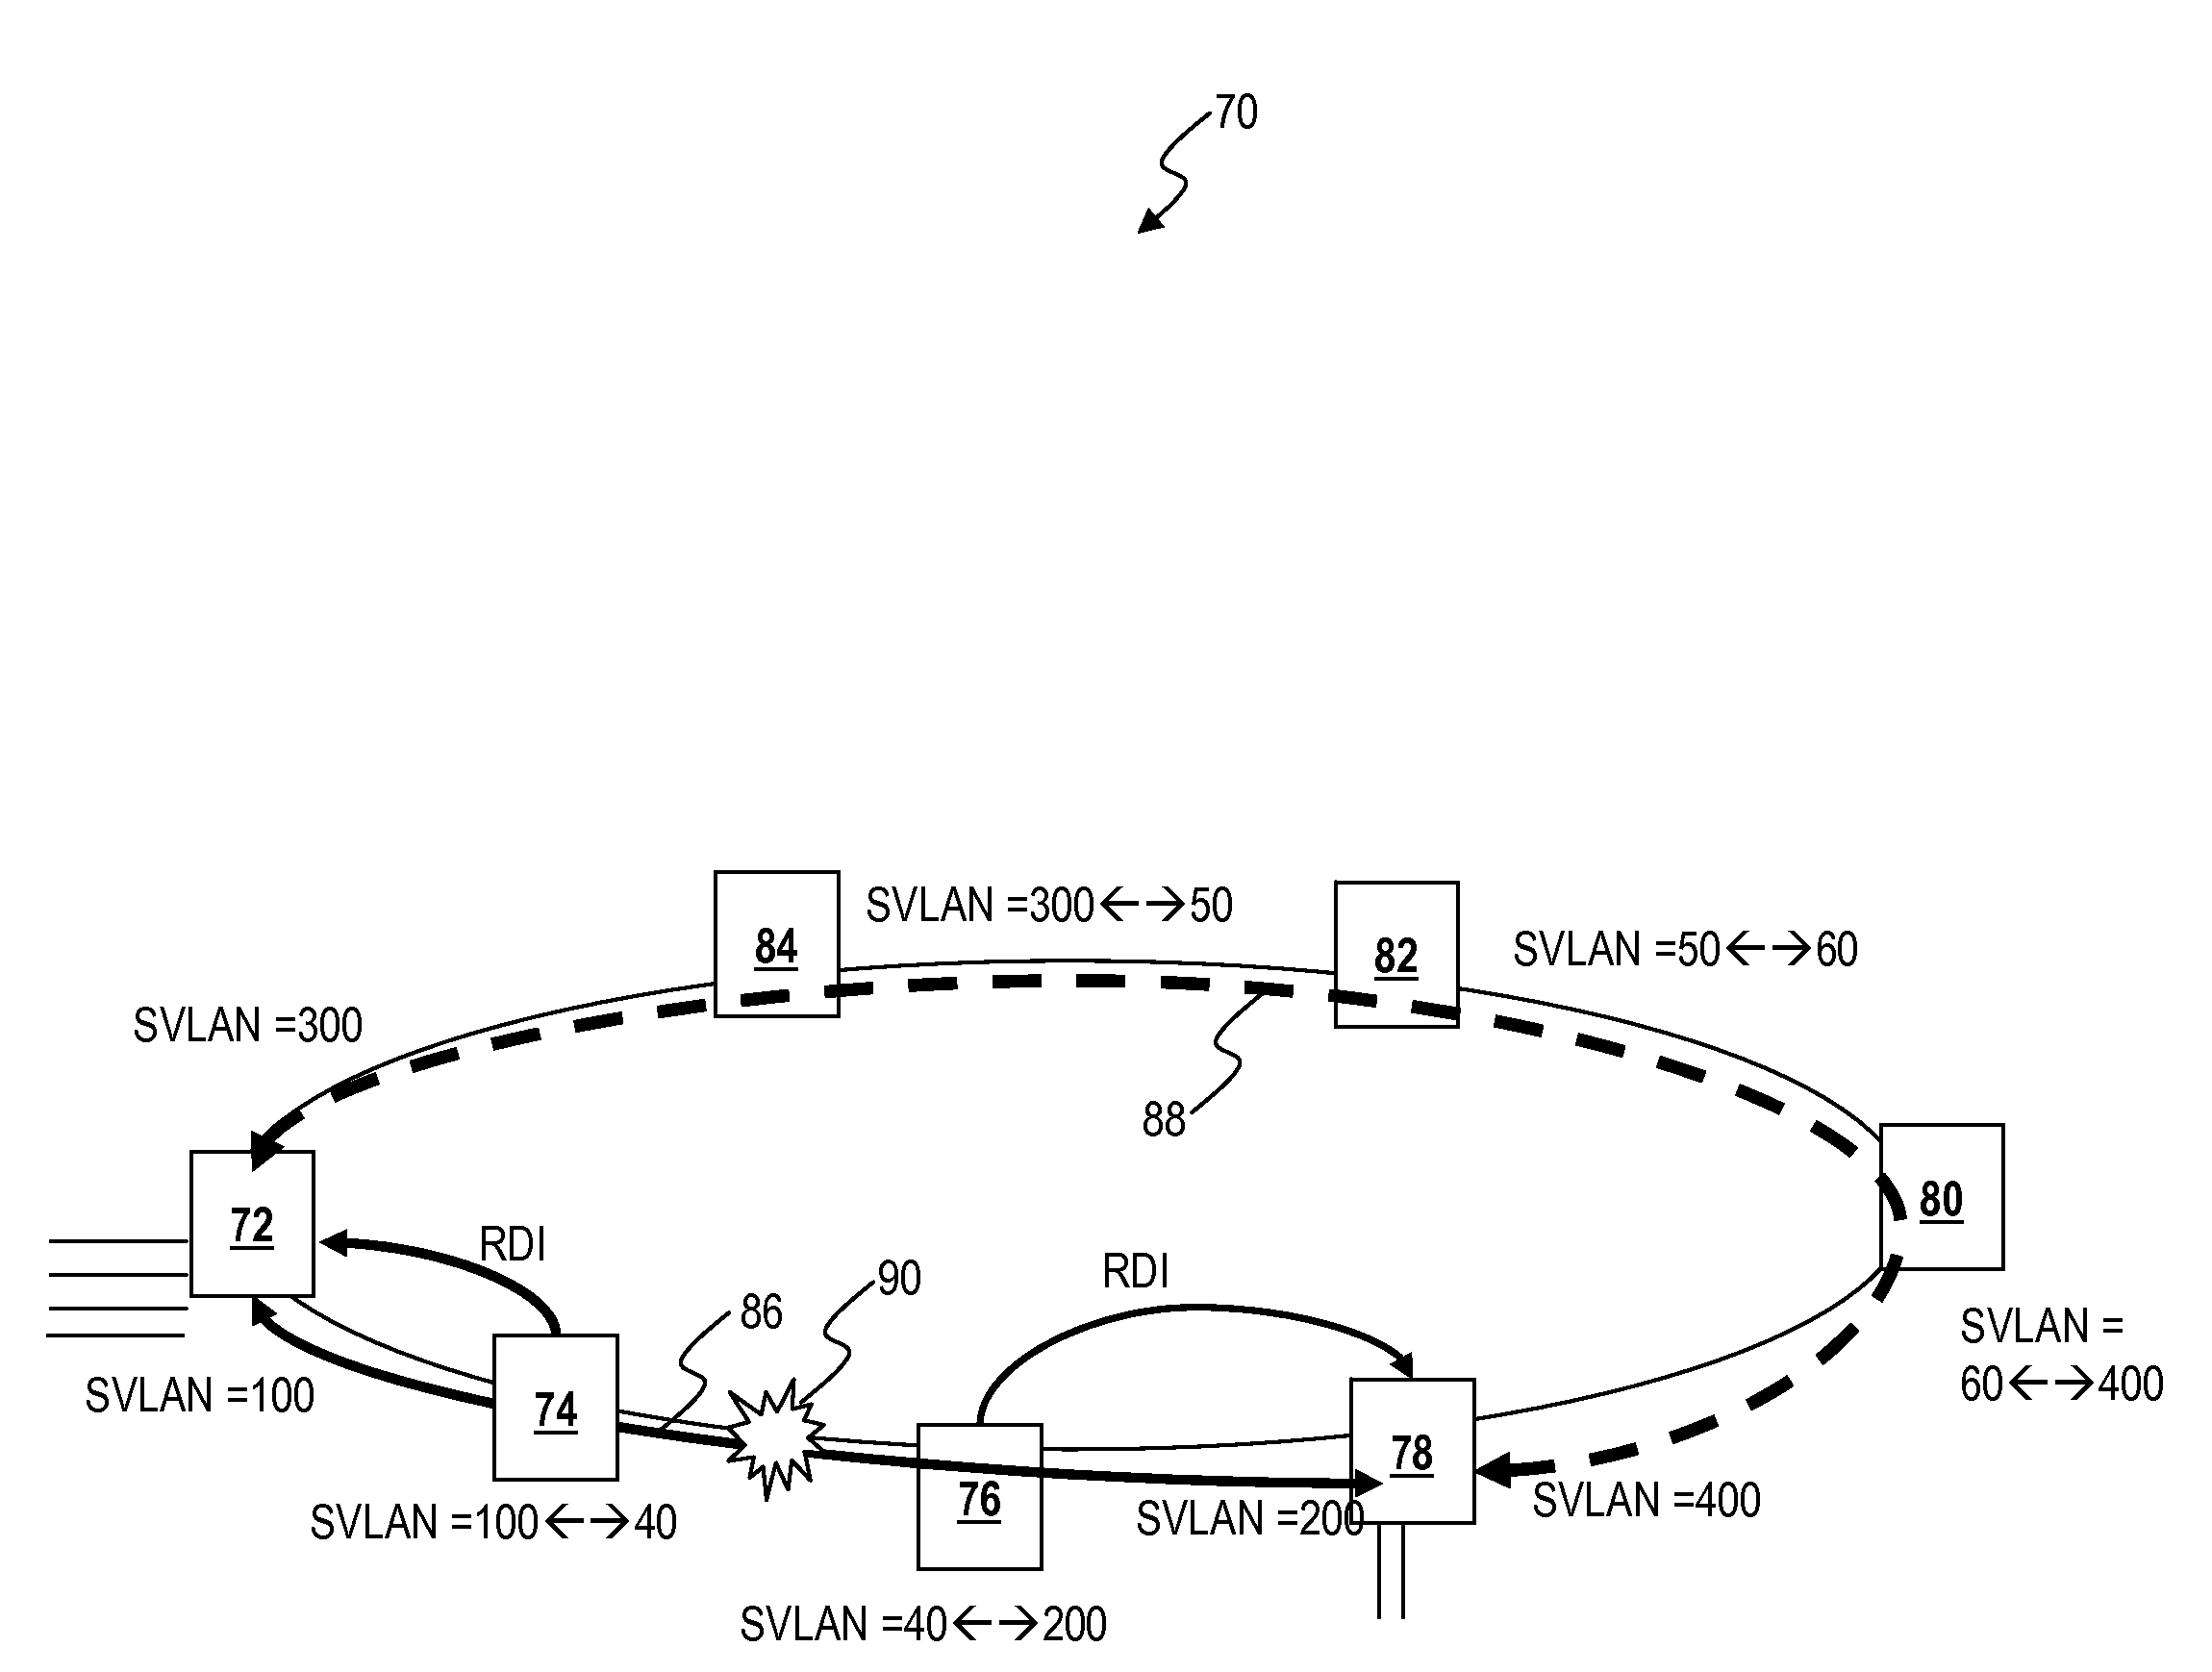 Systems and methods for scalable and rapid Ethernet fault detection